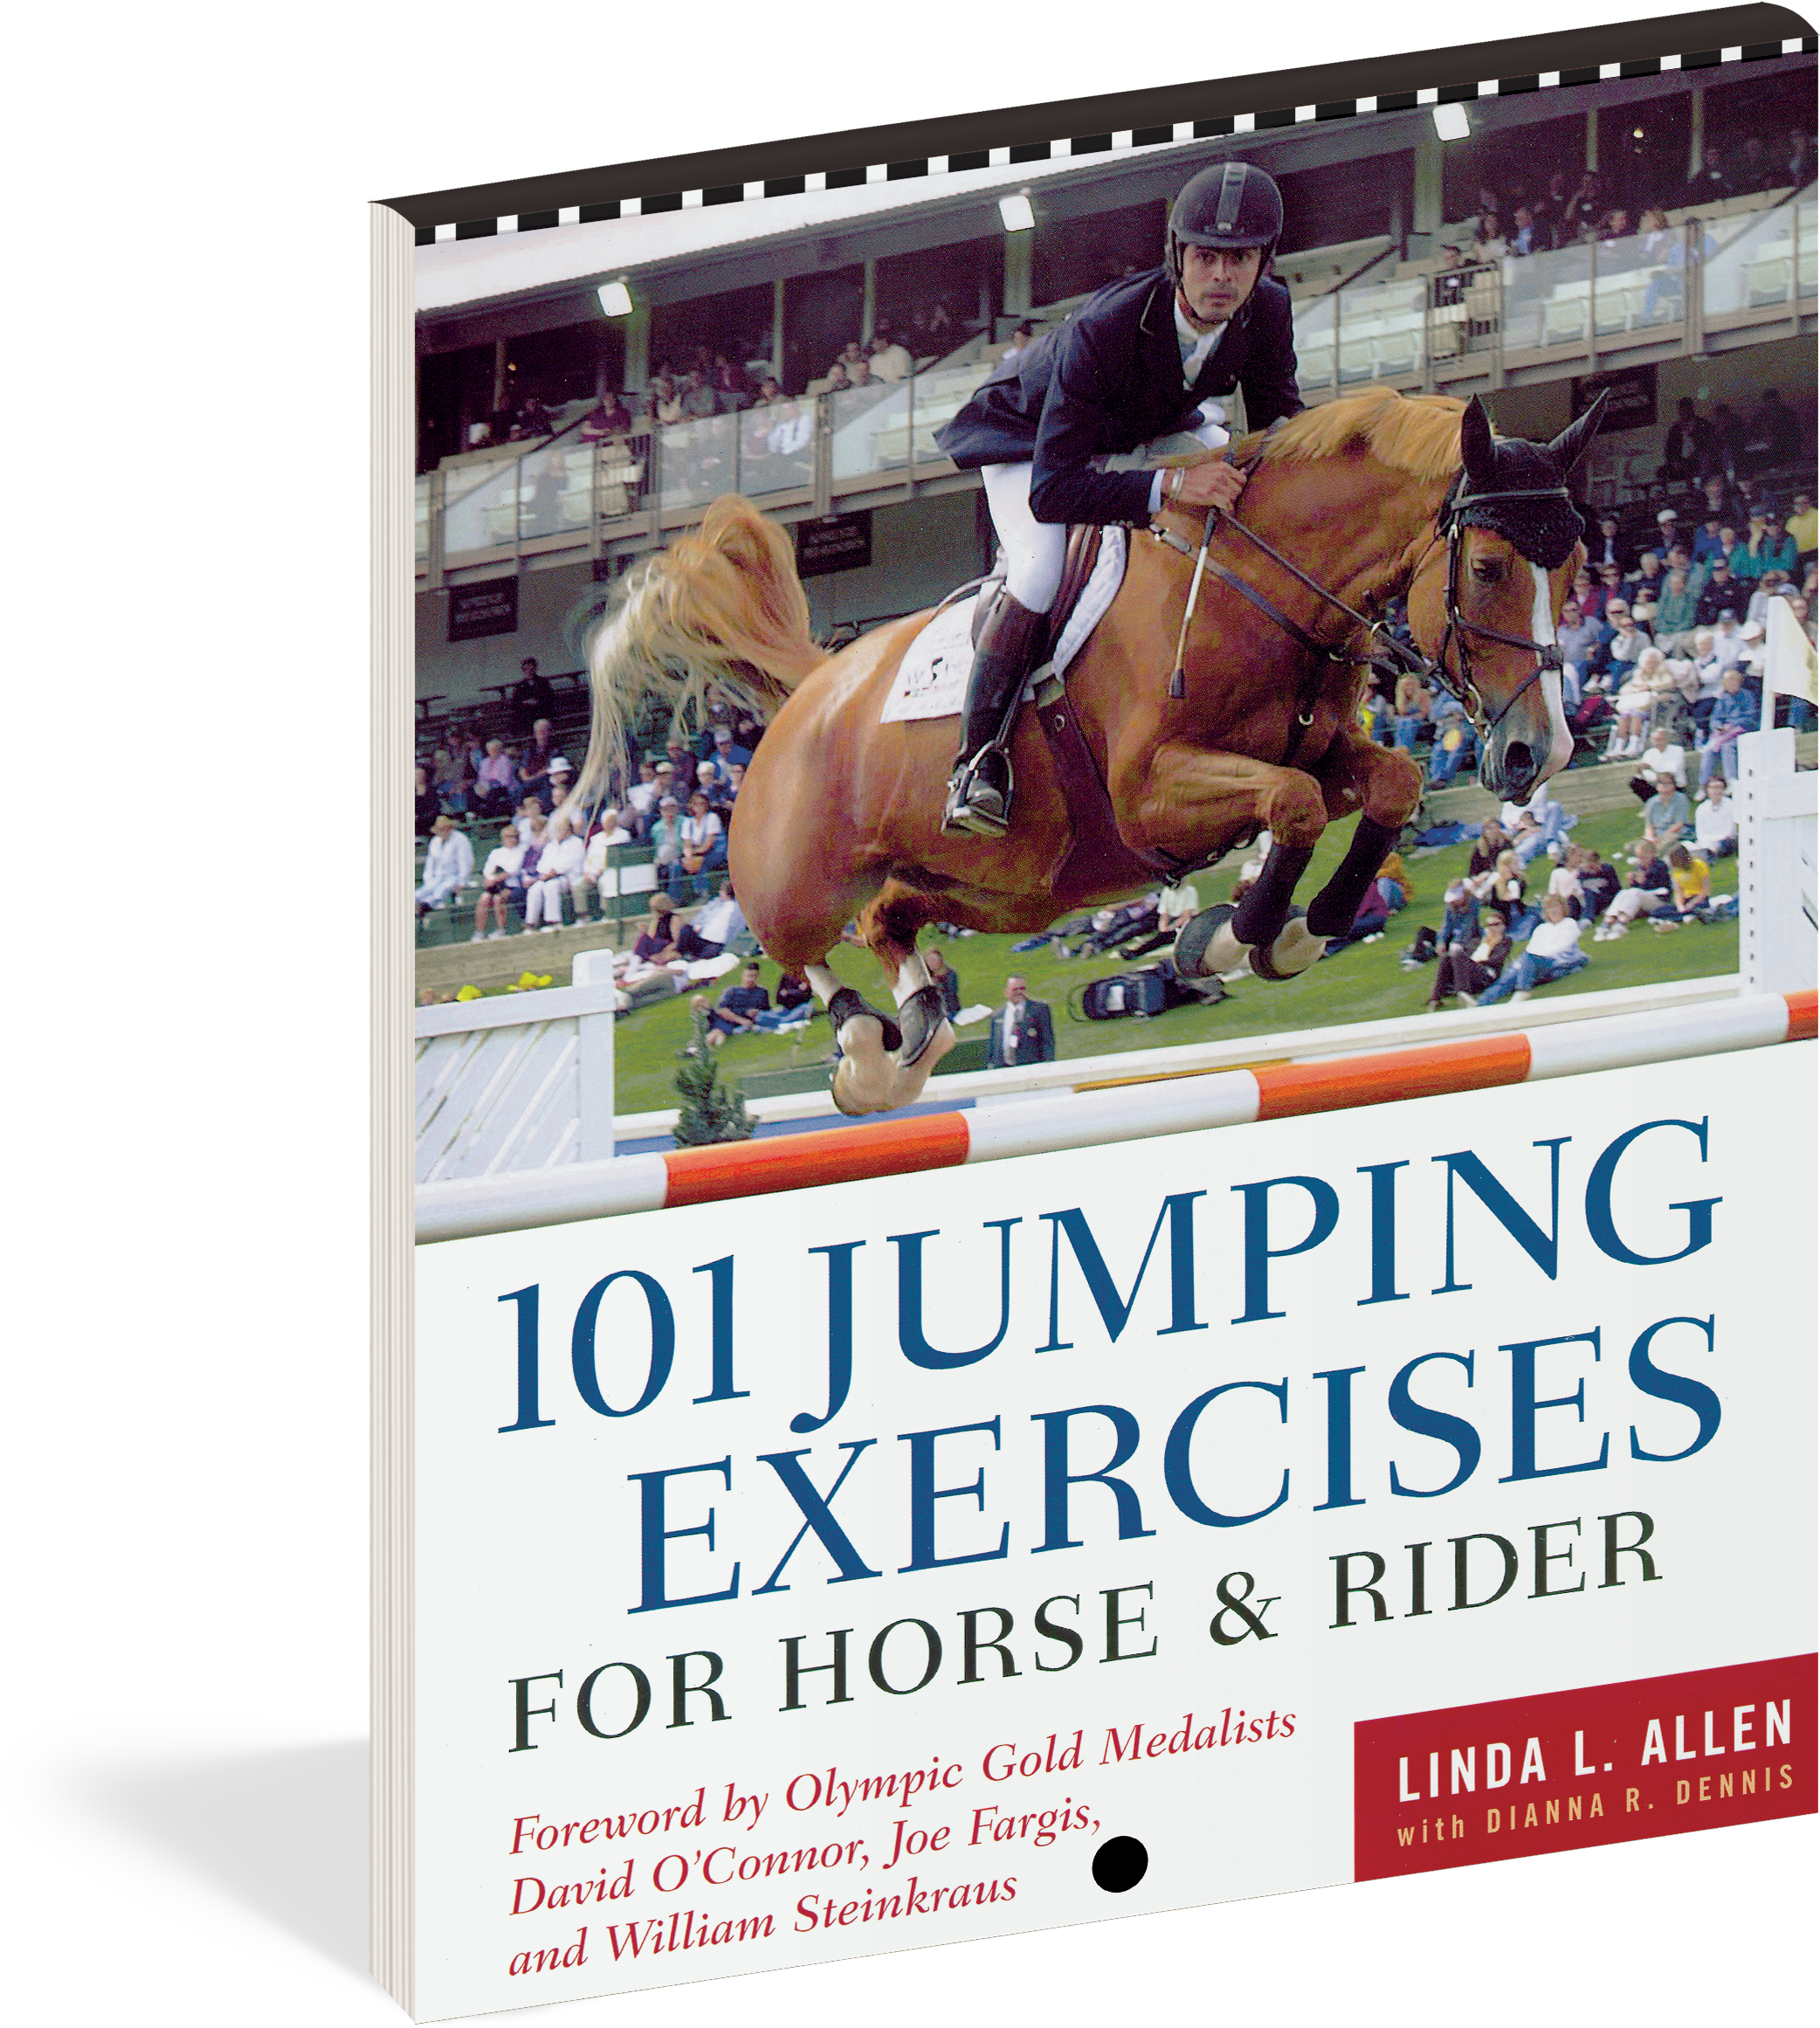 A Book Cover Of A Horse Jumping